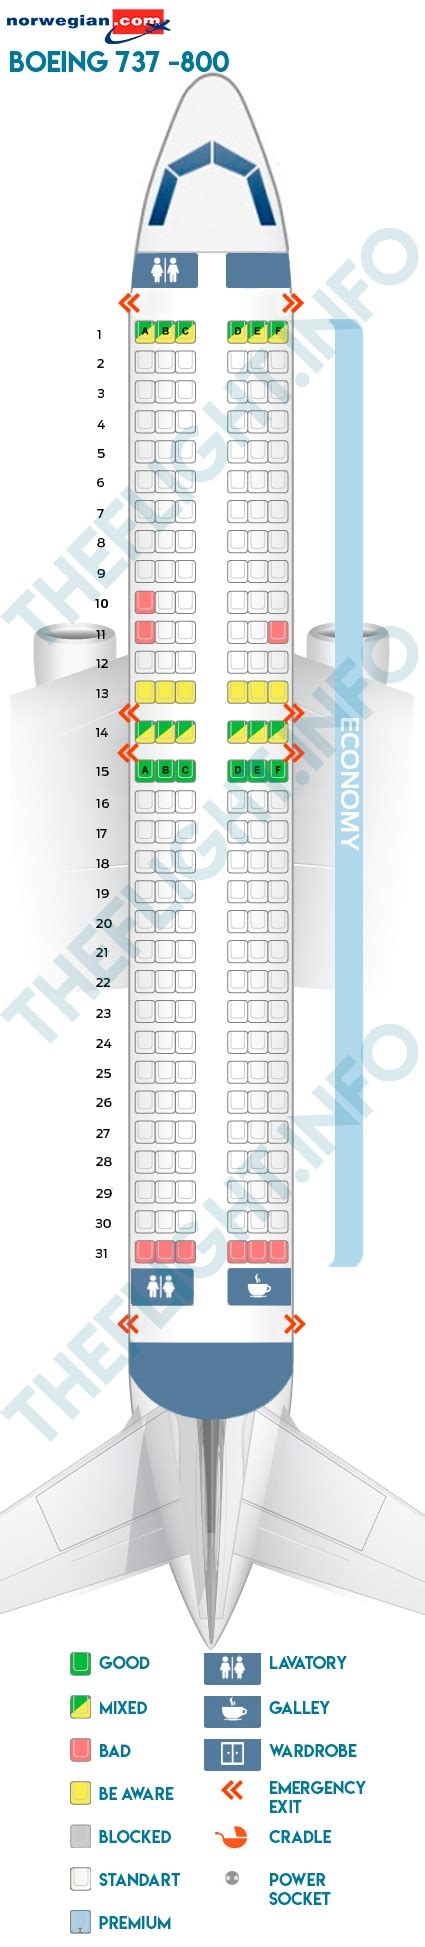 5 Images Boeing 737 800 Seating Plan Norwegian And Review Alqu Blog